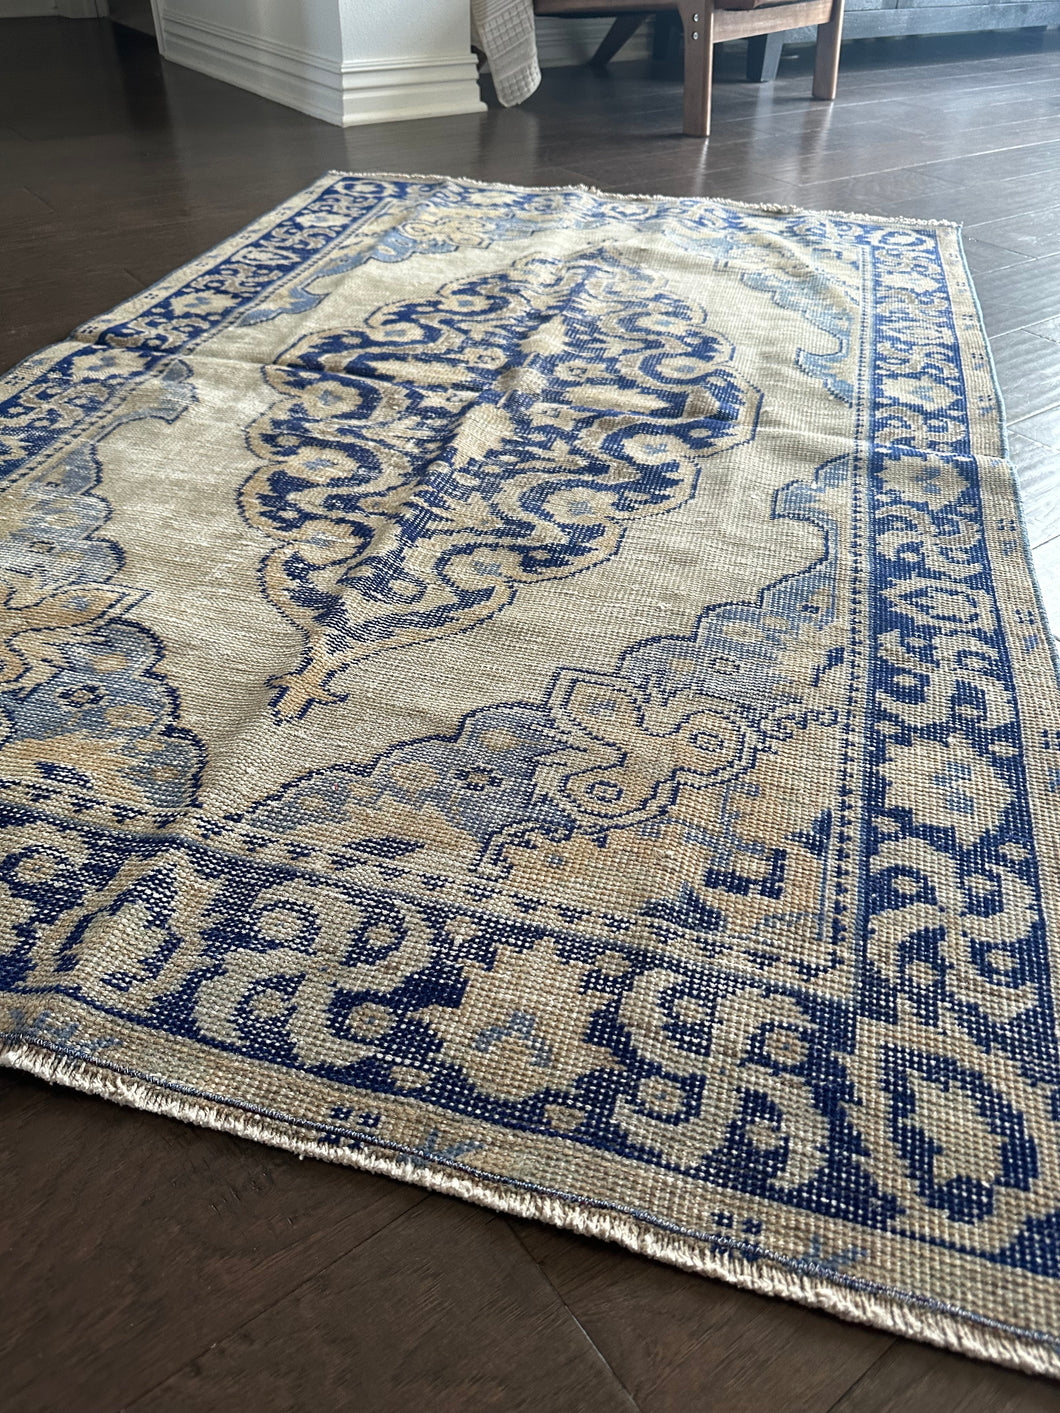 Vintage Ecru and Shades of Blue Turkish Accent Rug